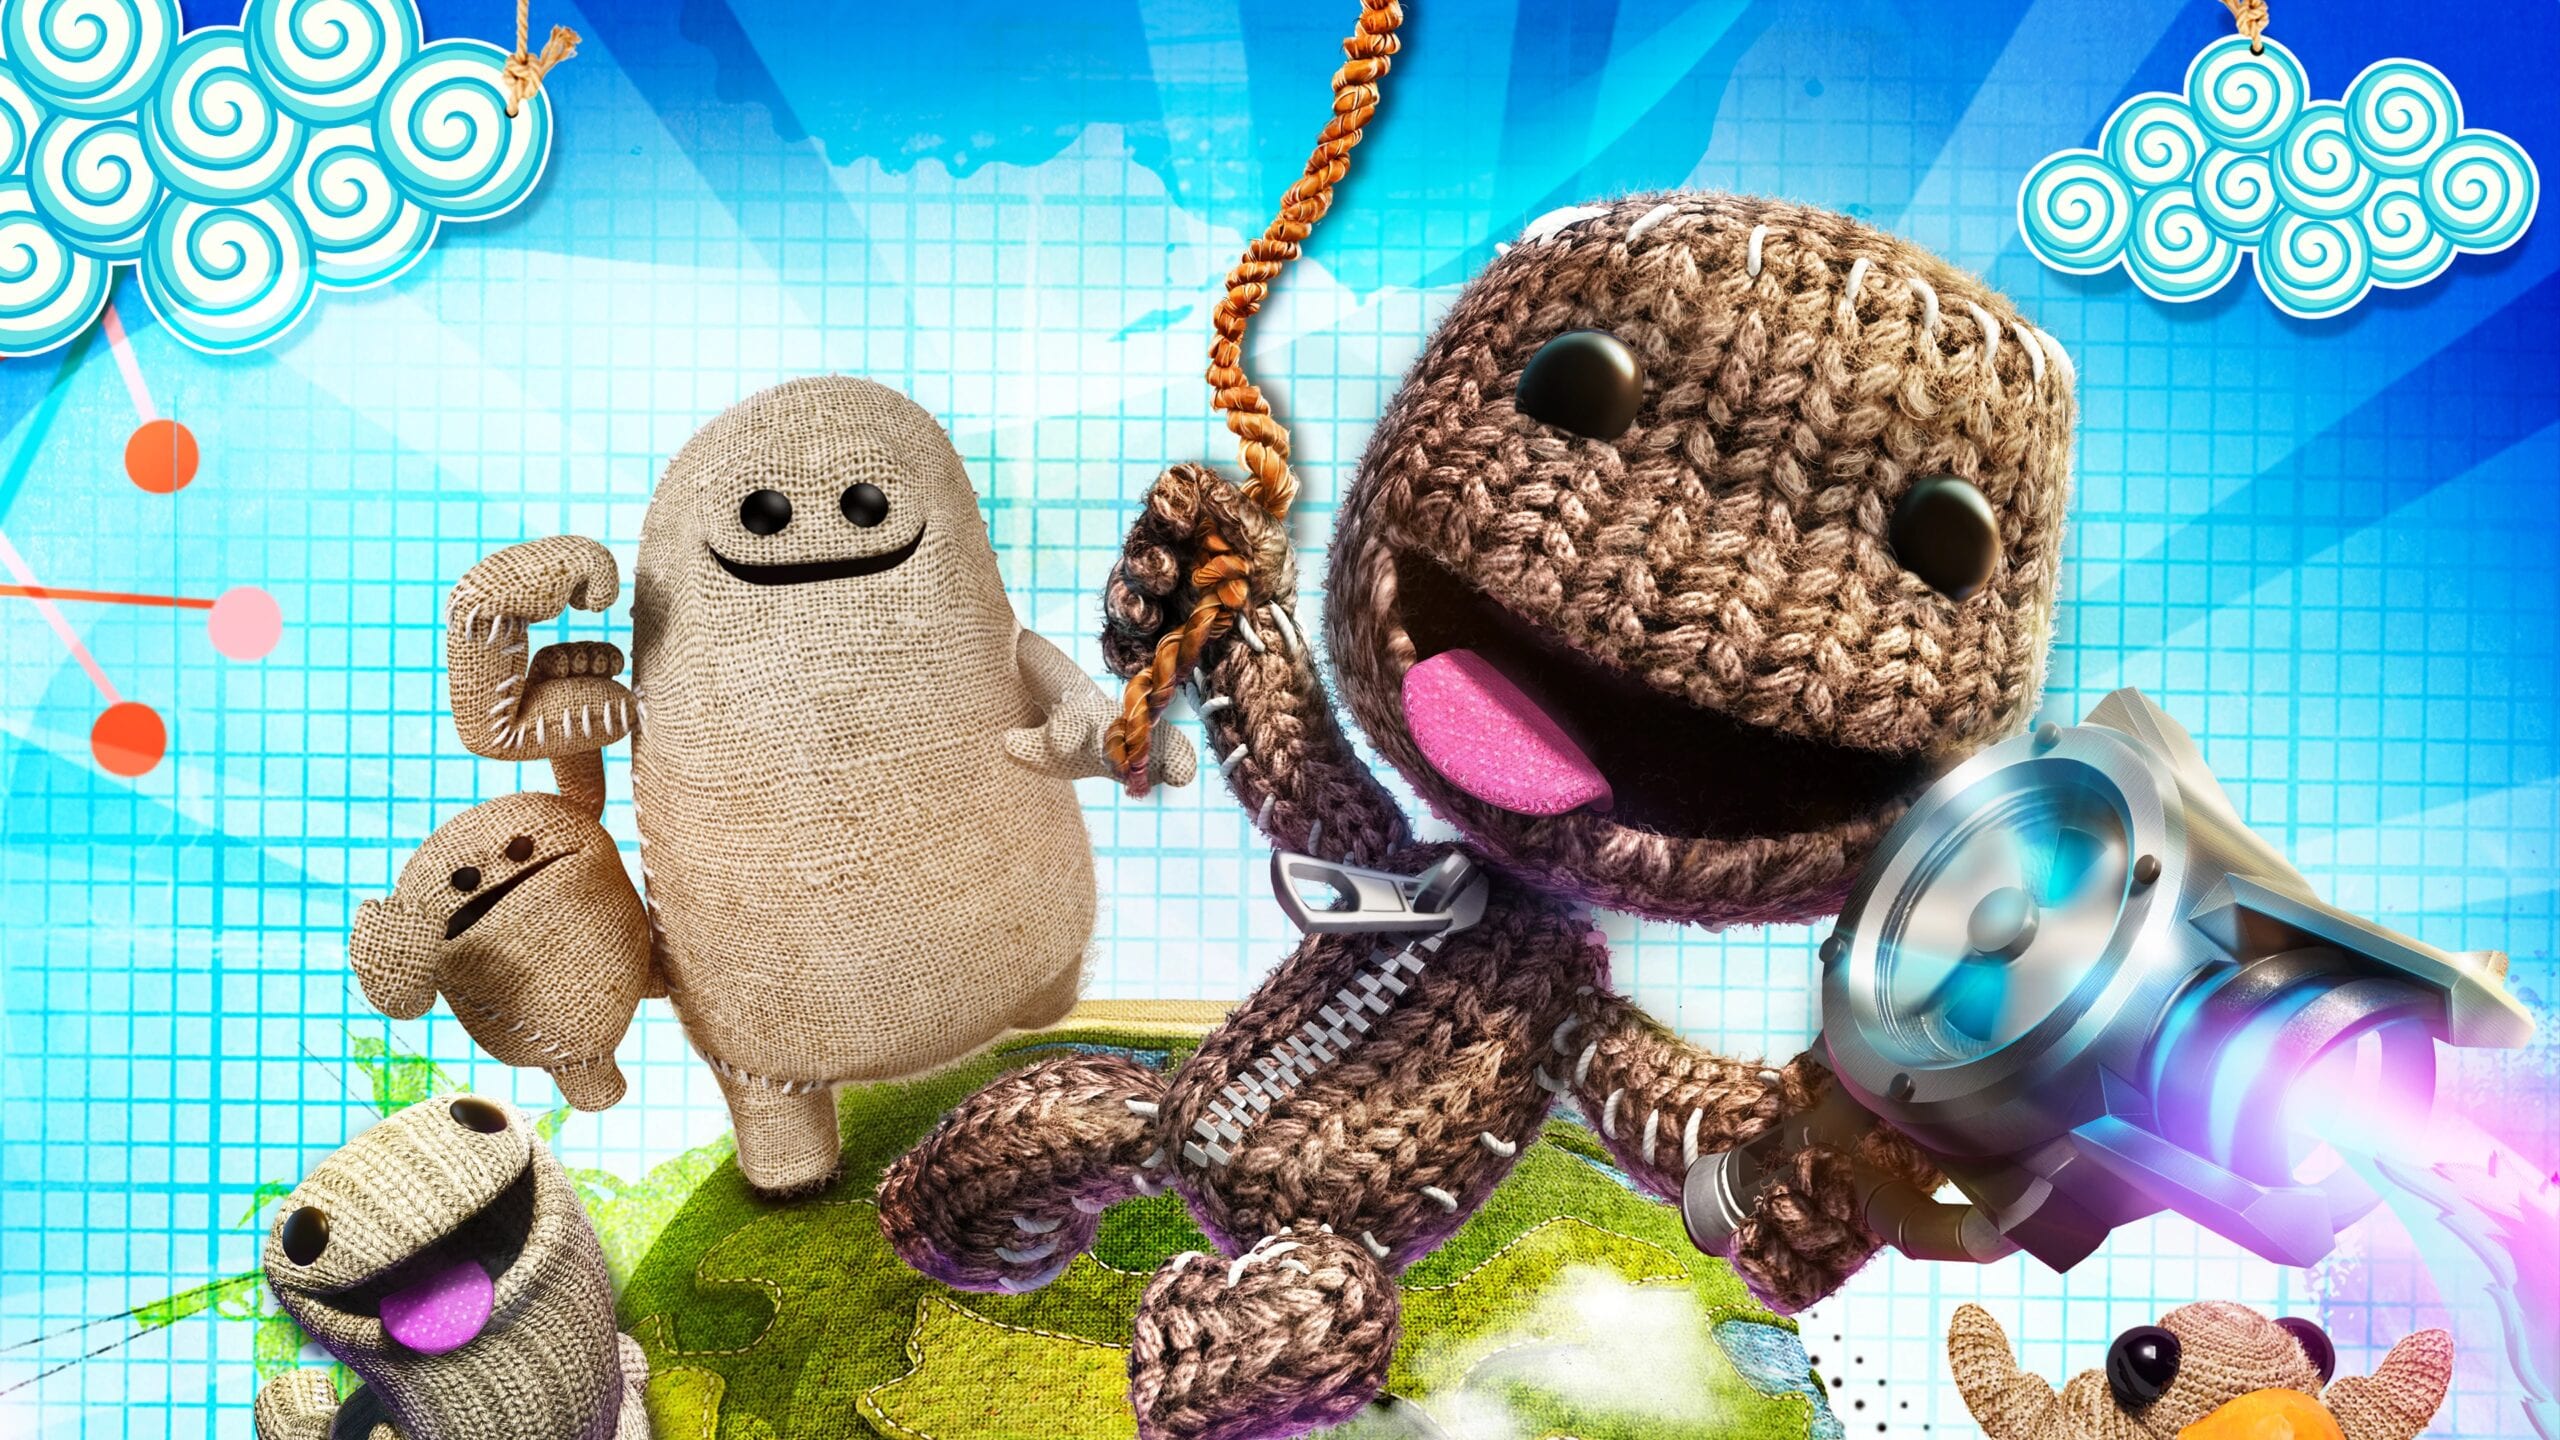 Sackboy characters stare at the camera while standing on a spherical world in this LittleBigPlanet artwork.